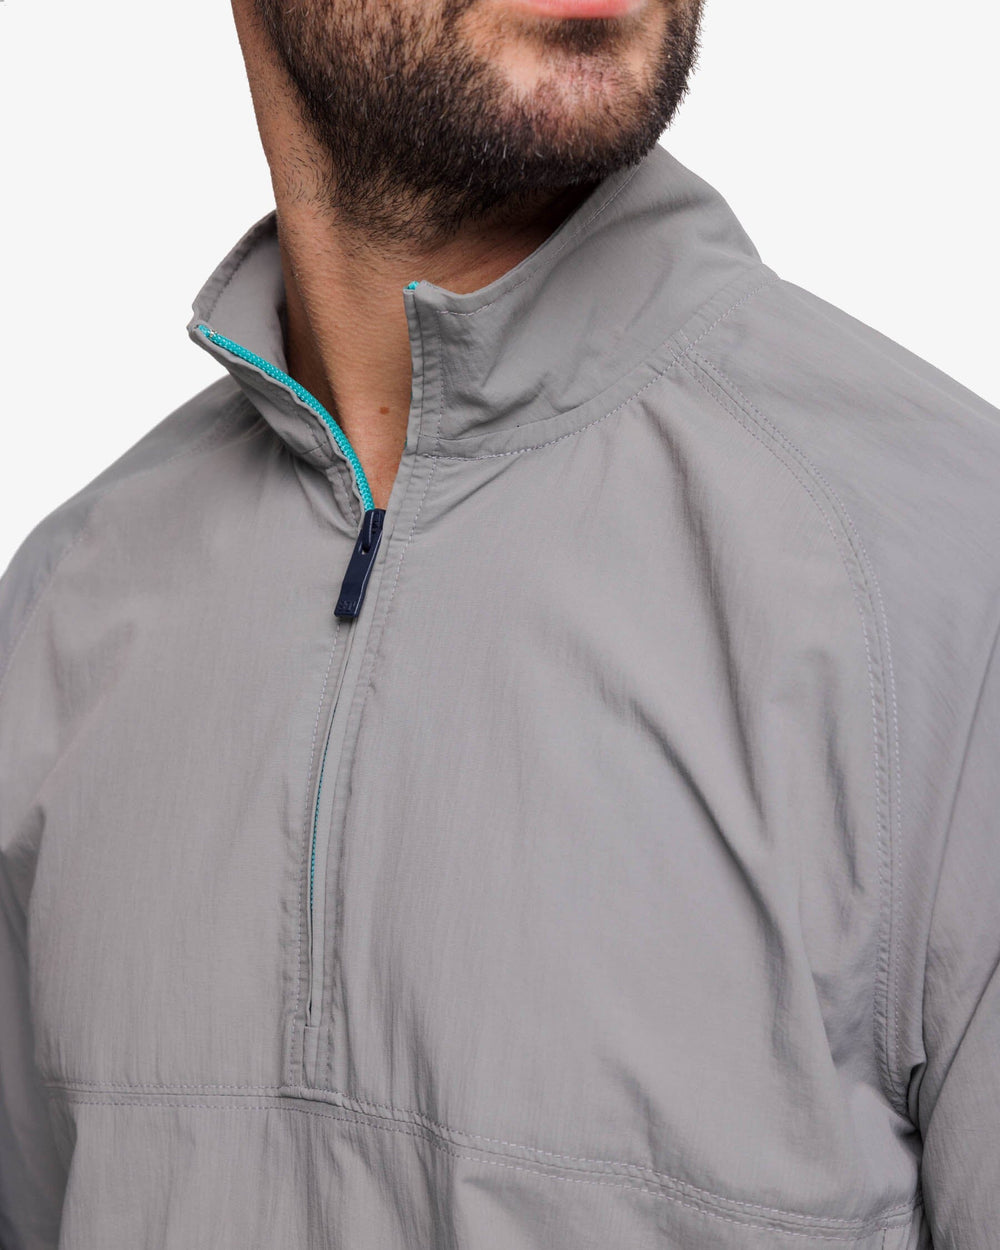 The detail view of the Southern Tide Shoreline Performance Pullover by Southern Tide - Frost Grey